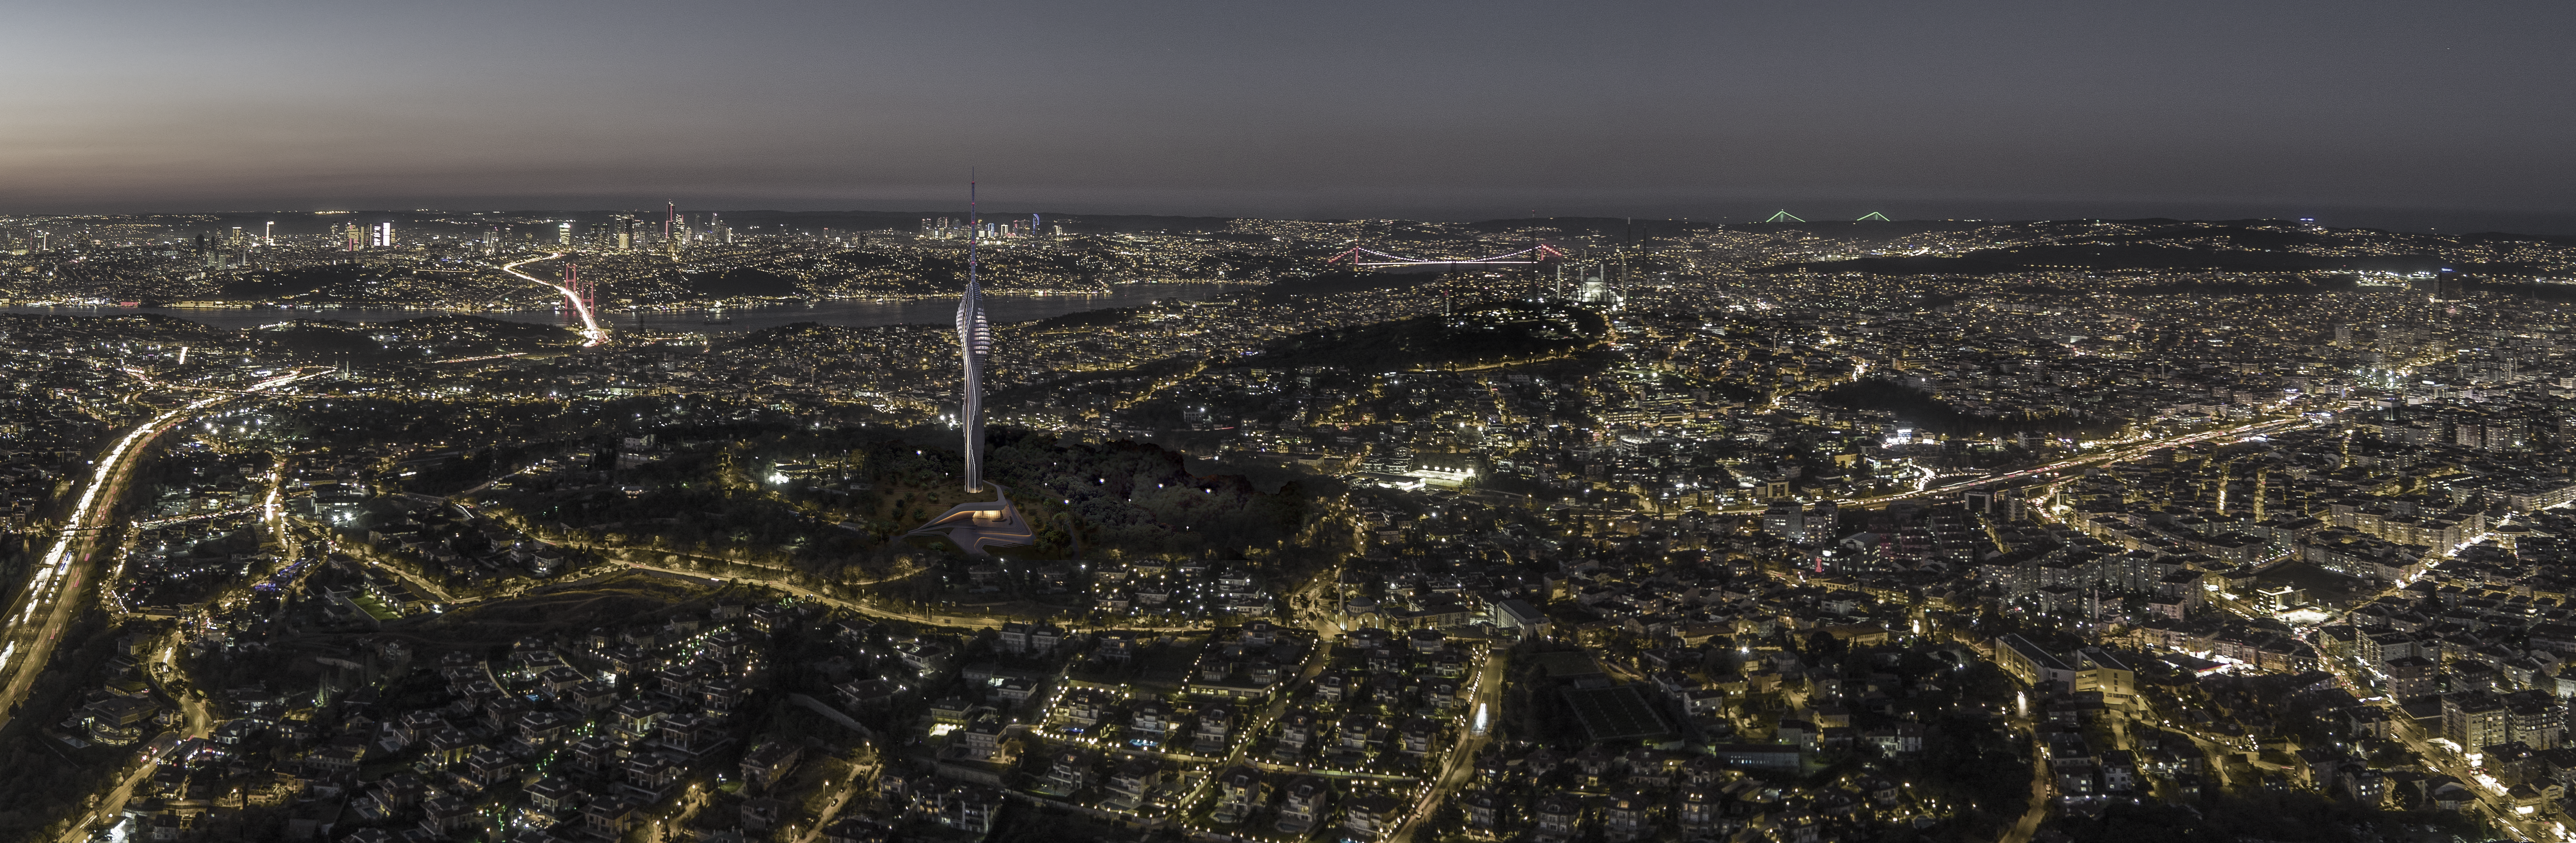 A breathtaking view of the city you'll be able to see at night